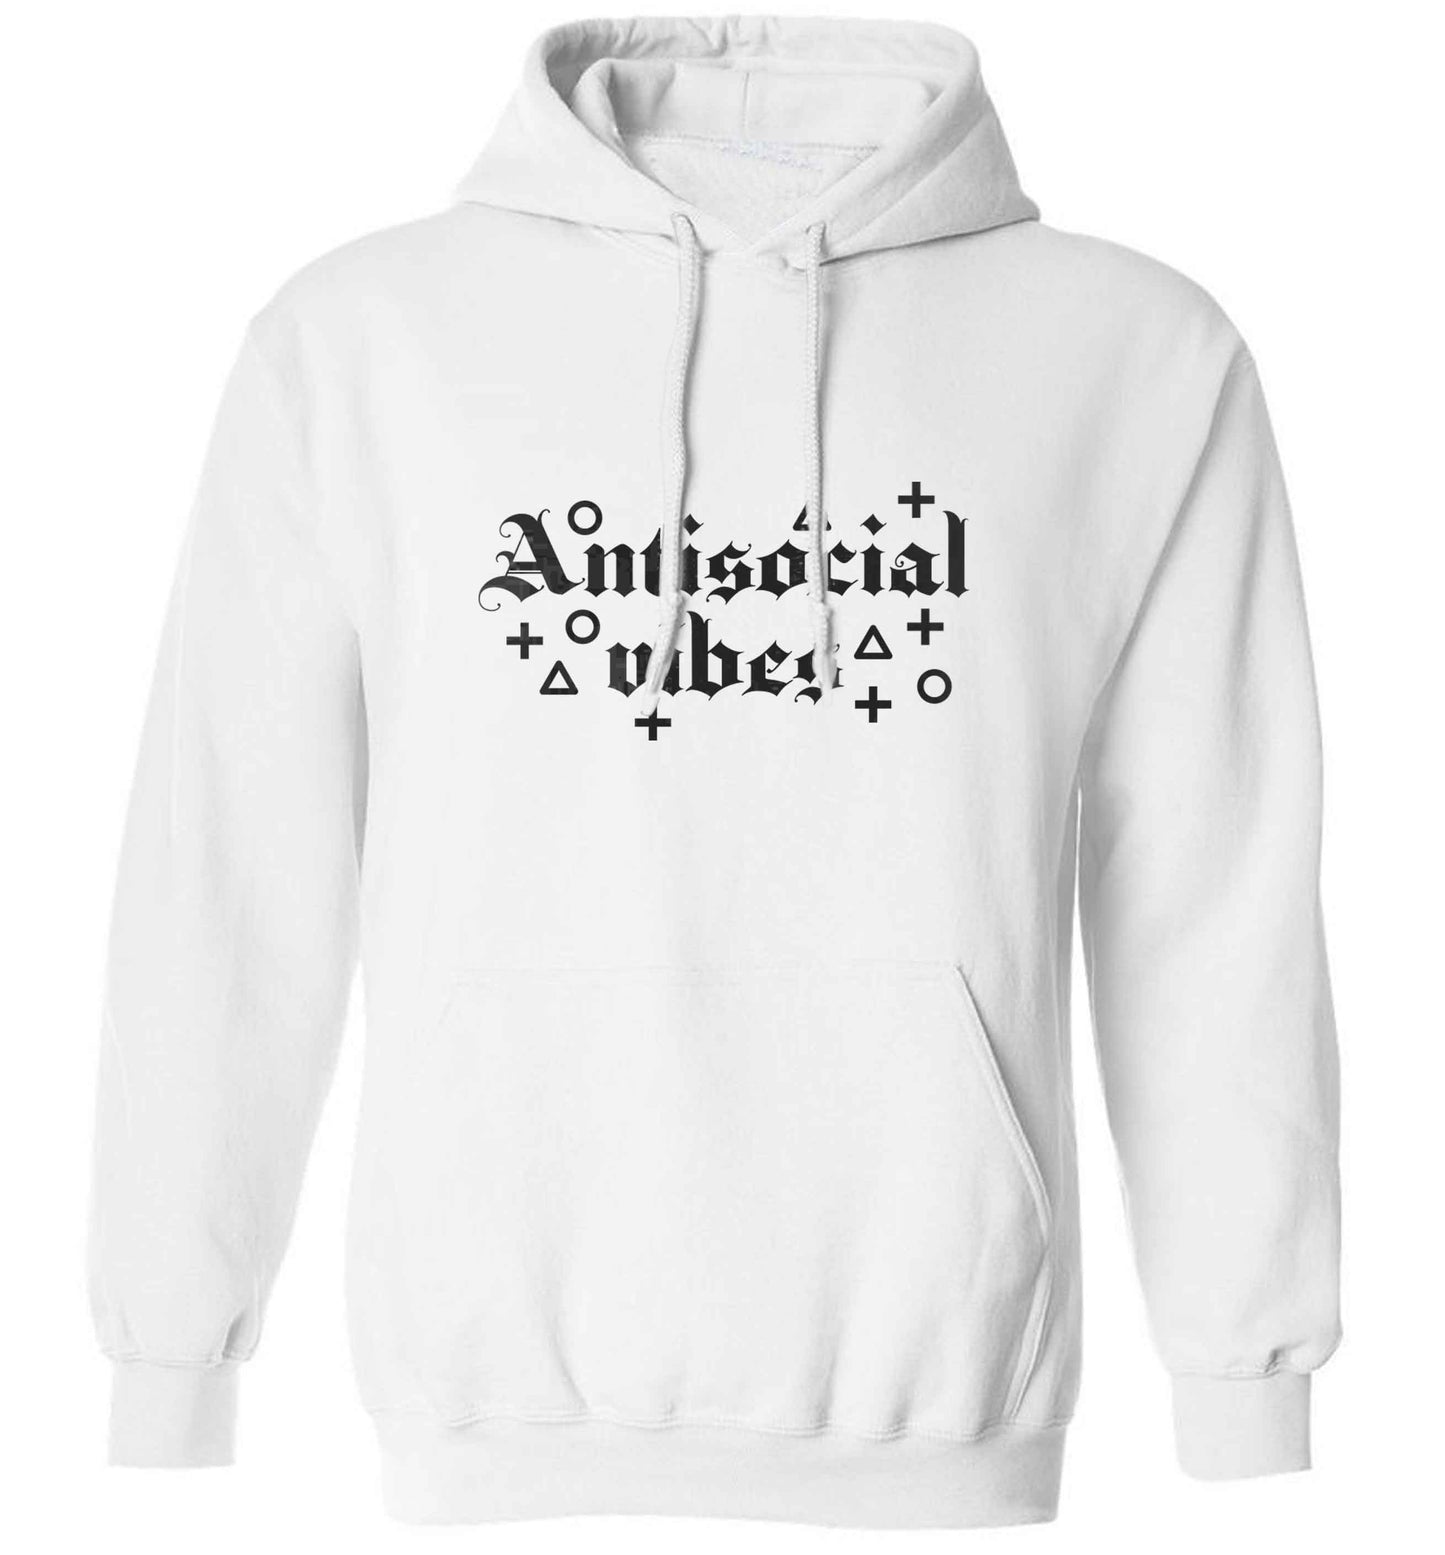 Antisocial vibes adults unisex white hoodie 2XL